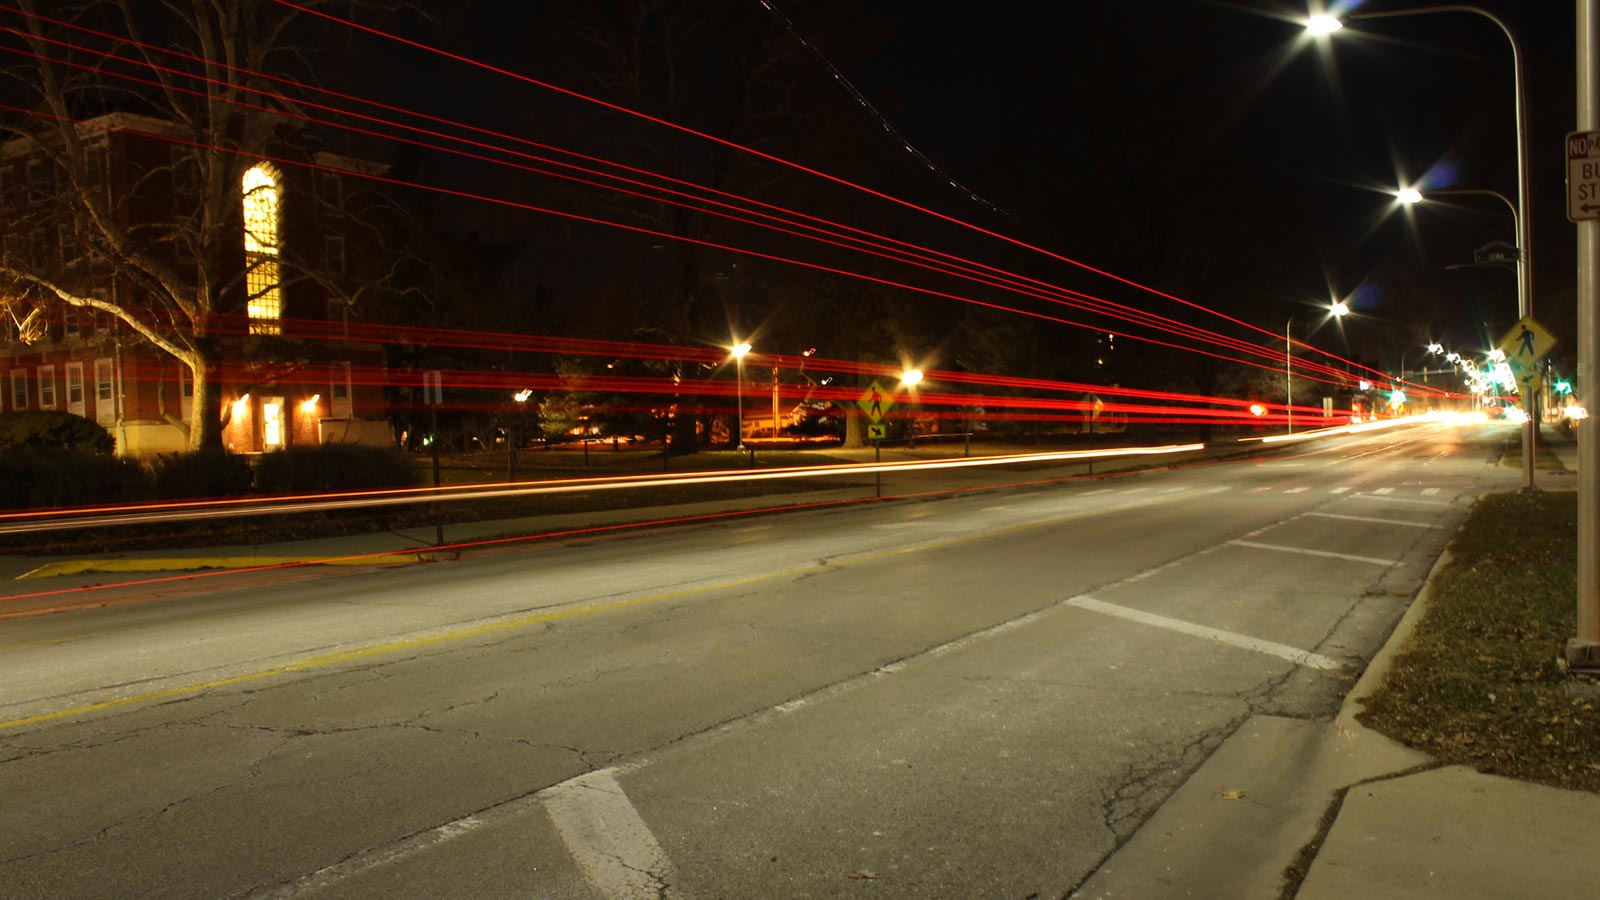 A street and University of Illinois campus buildings at night. Red lines show where car tail lights passed by.